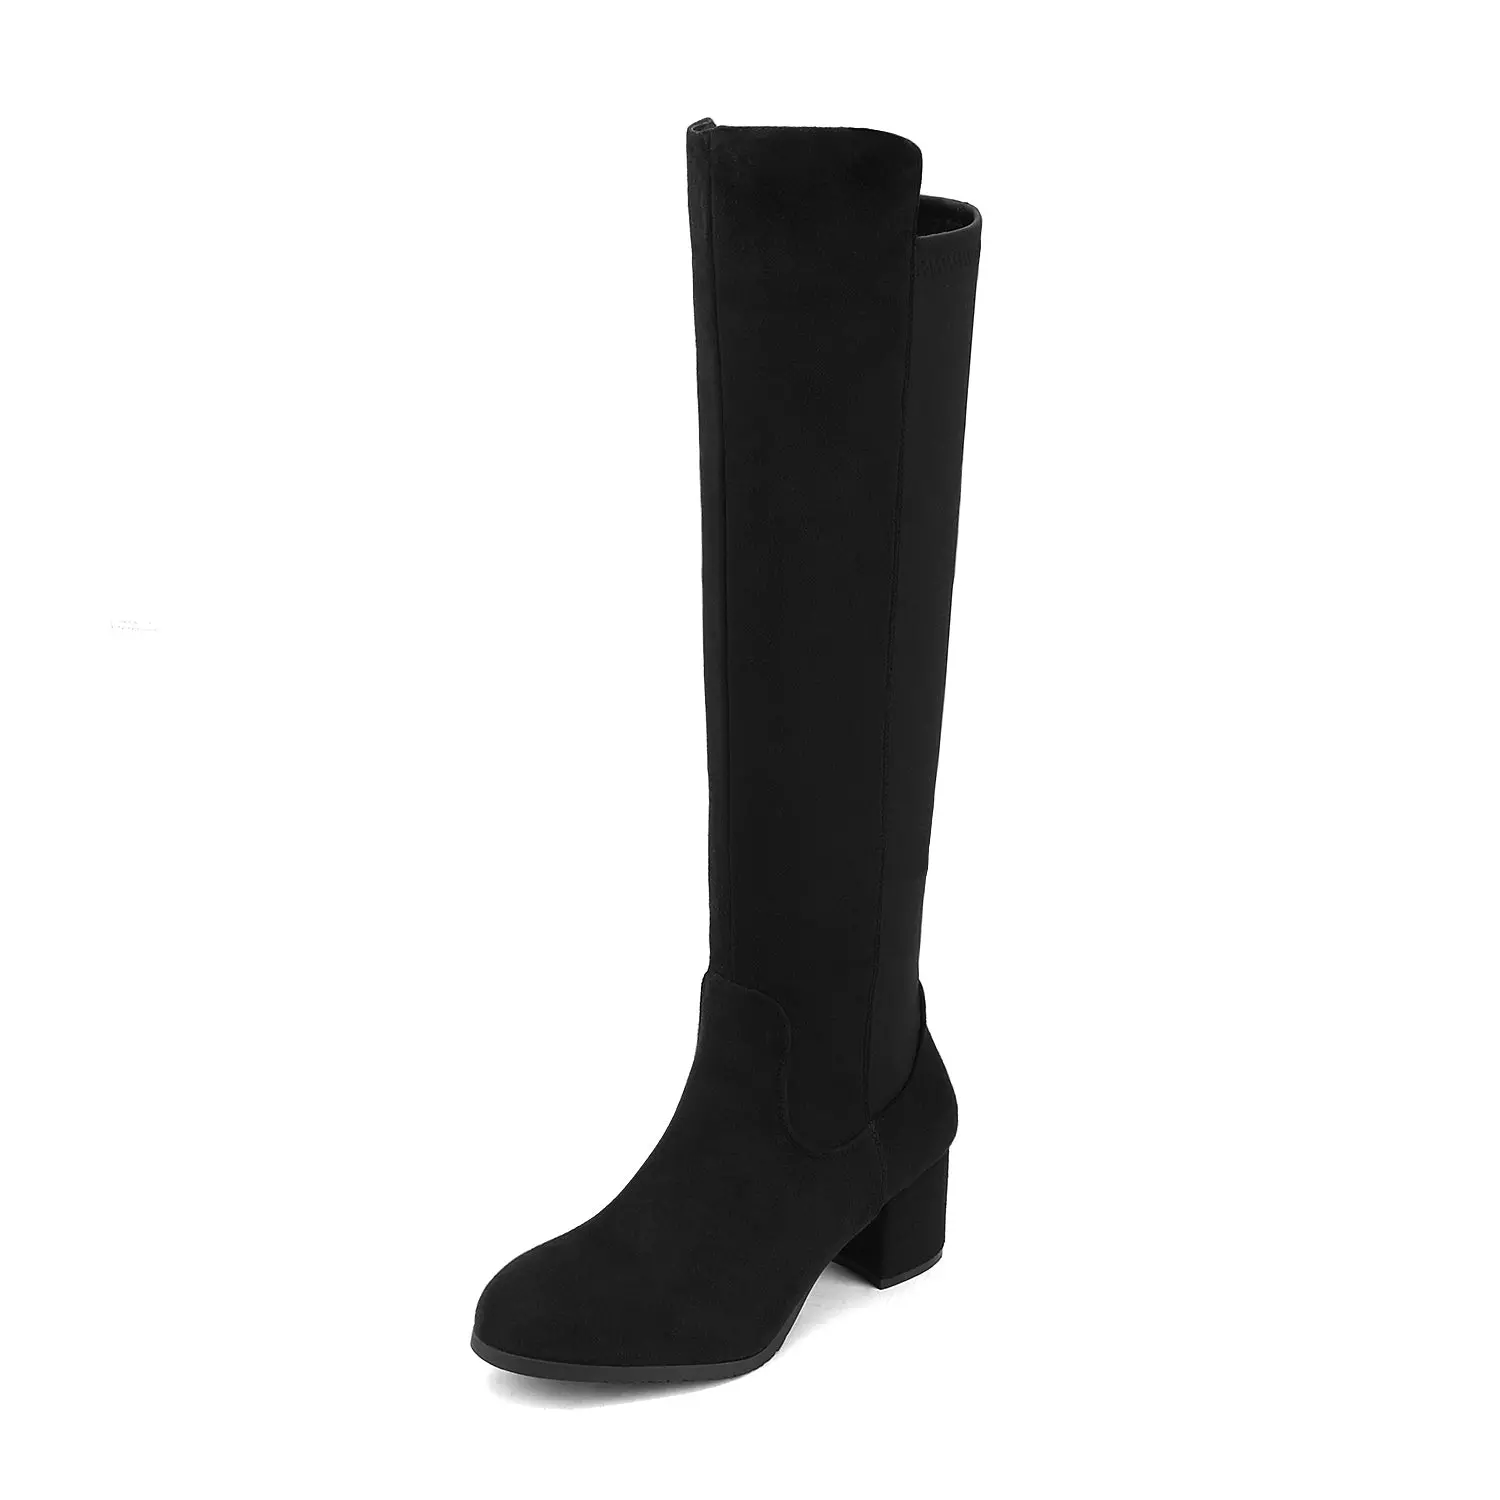 Dream Pairs Knee High Boots For Narrow Calves